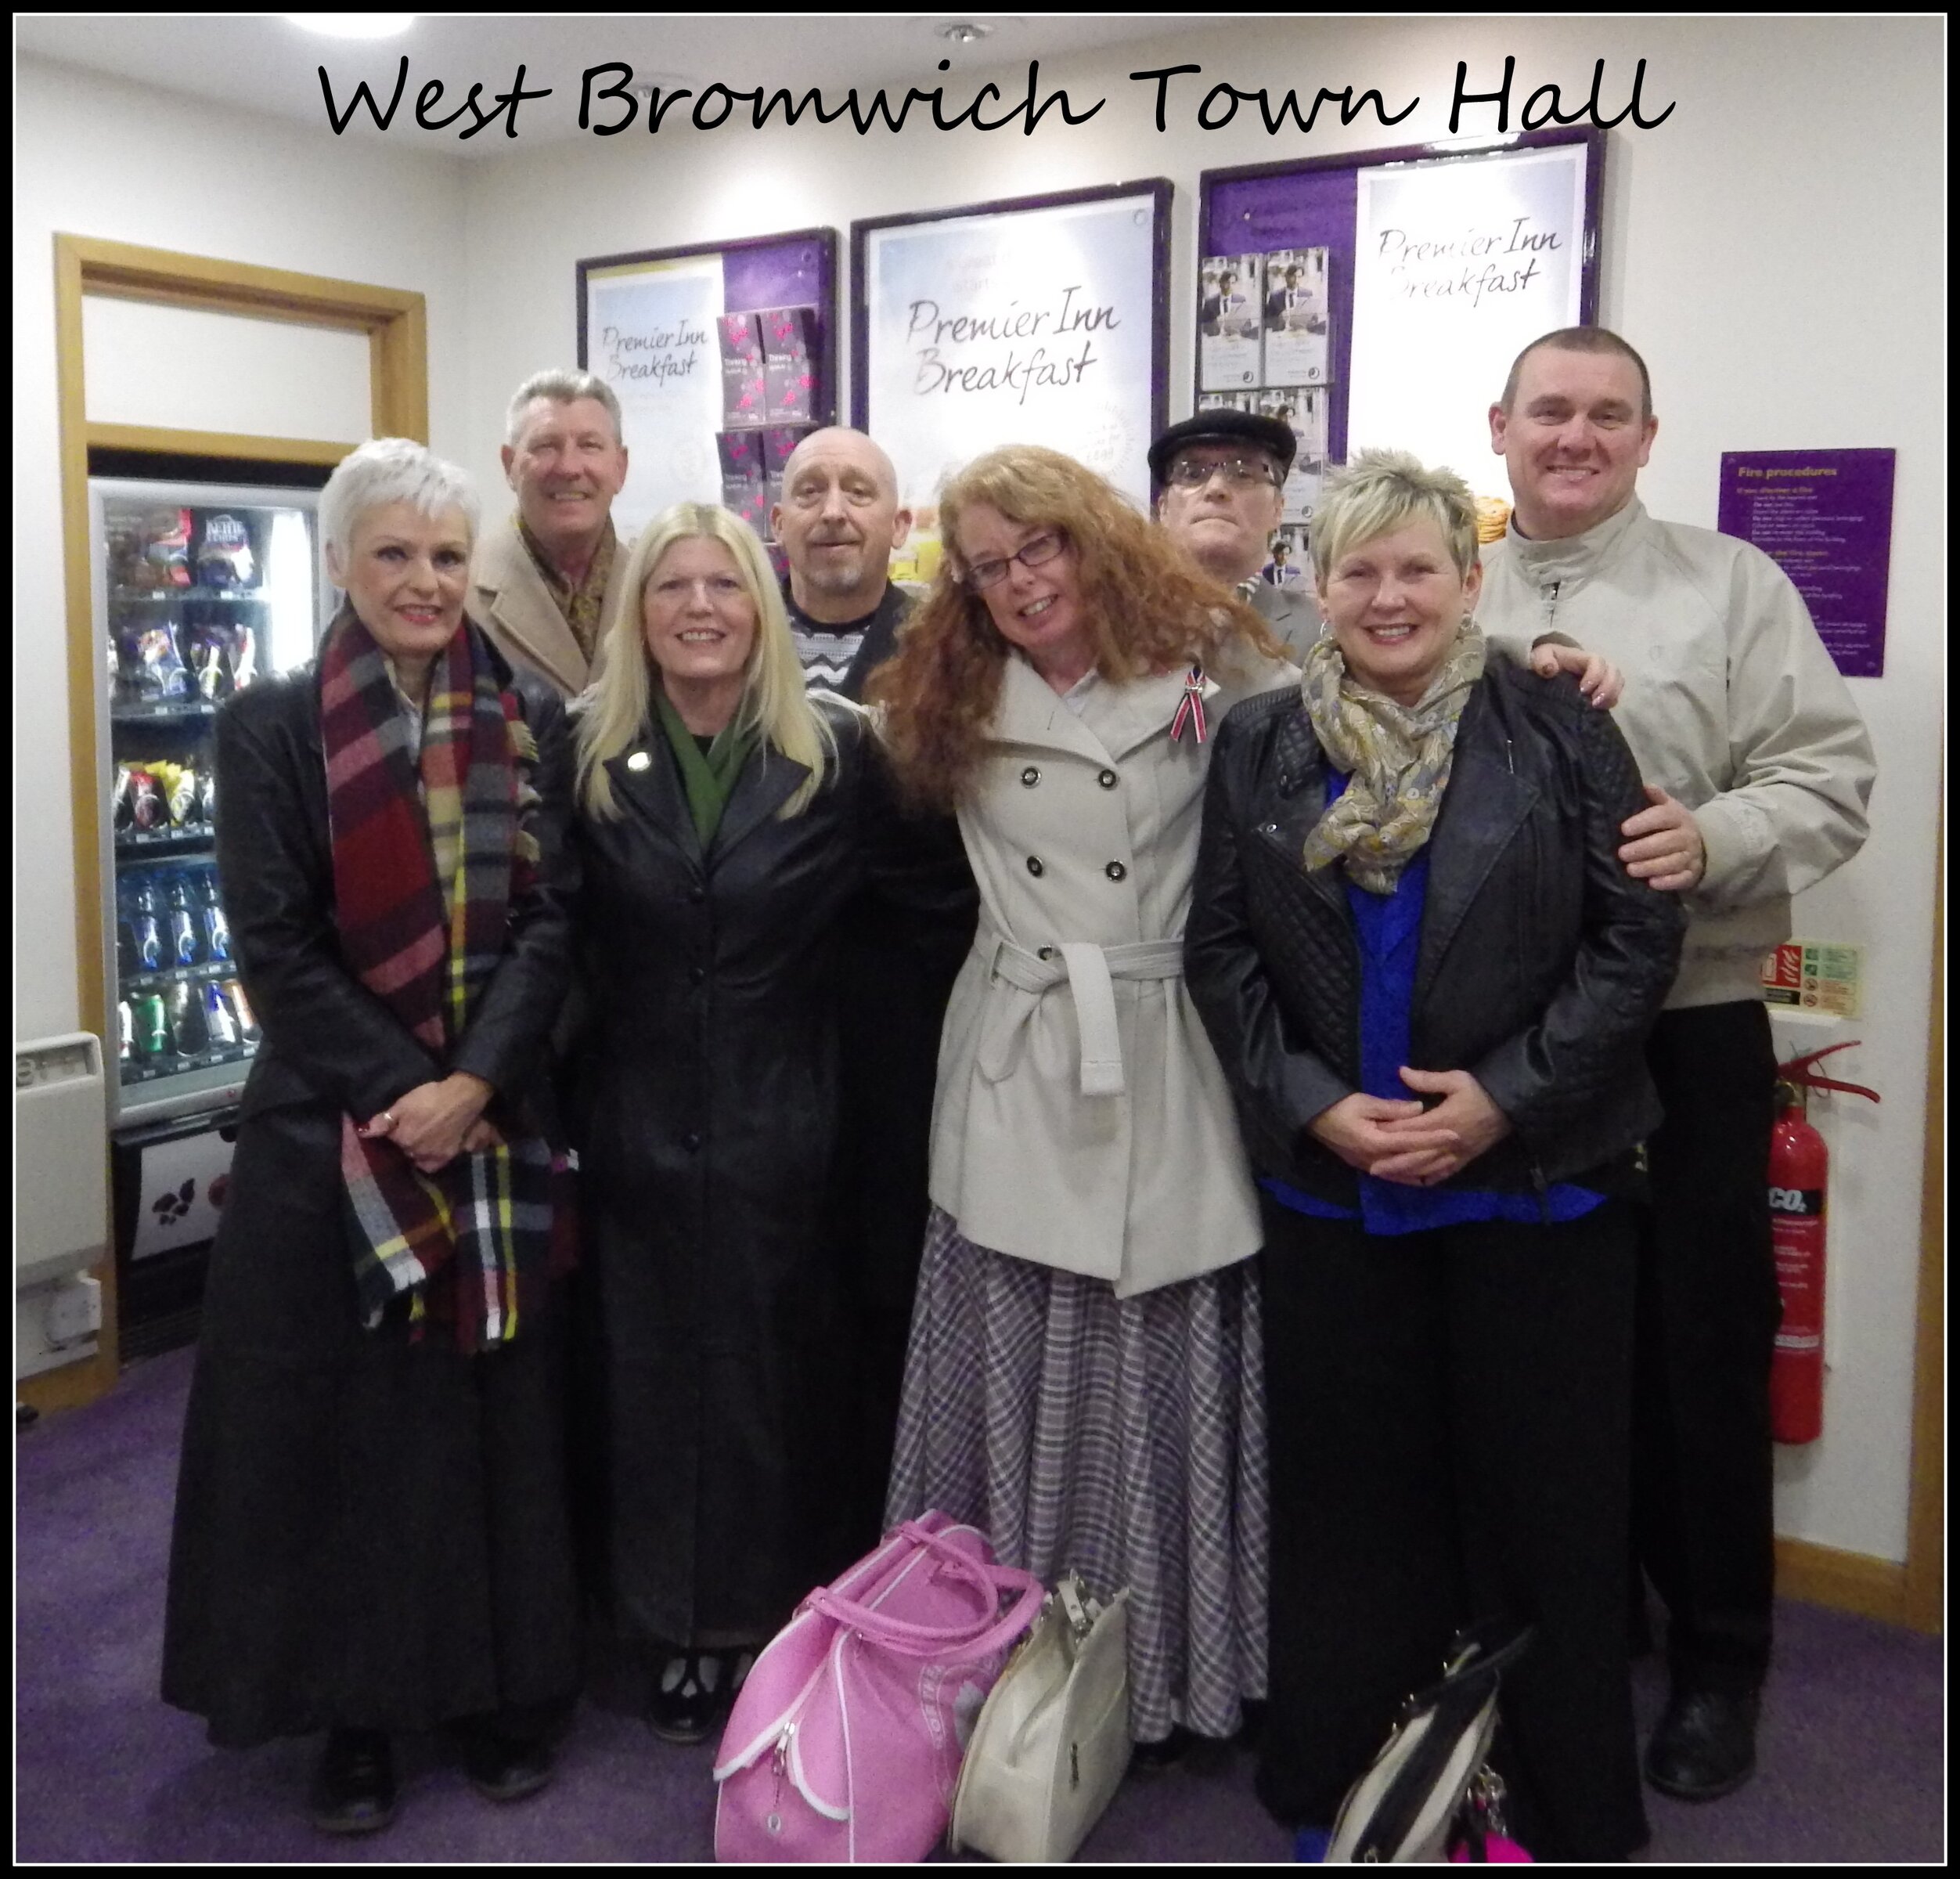 Setting off for West Bromwich Town Hall